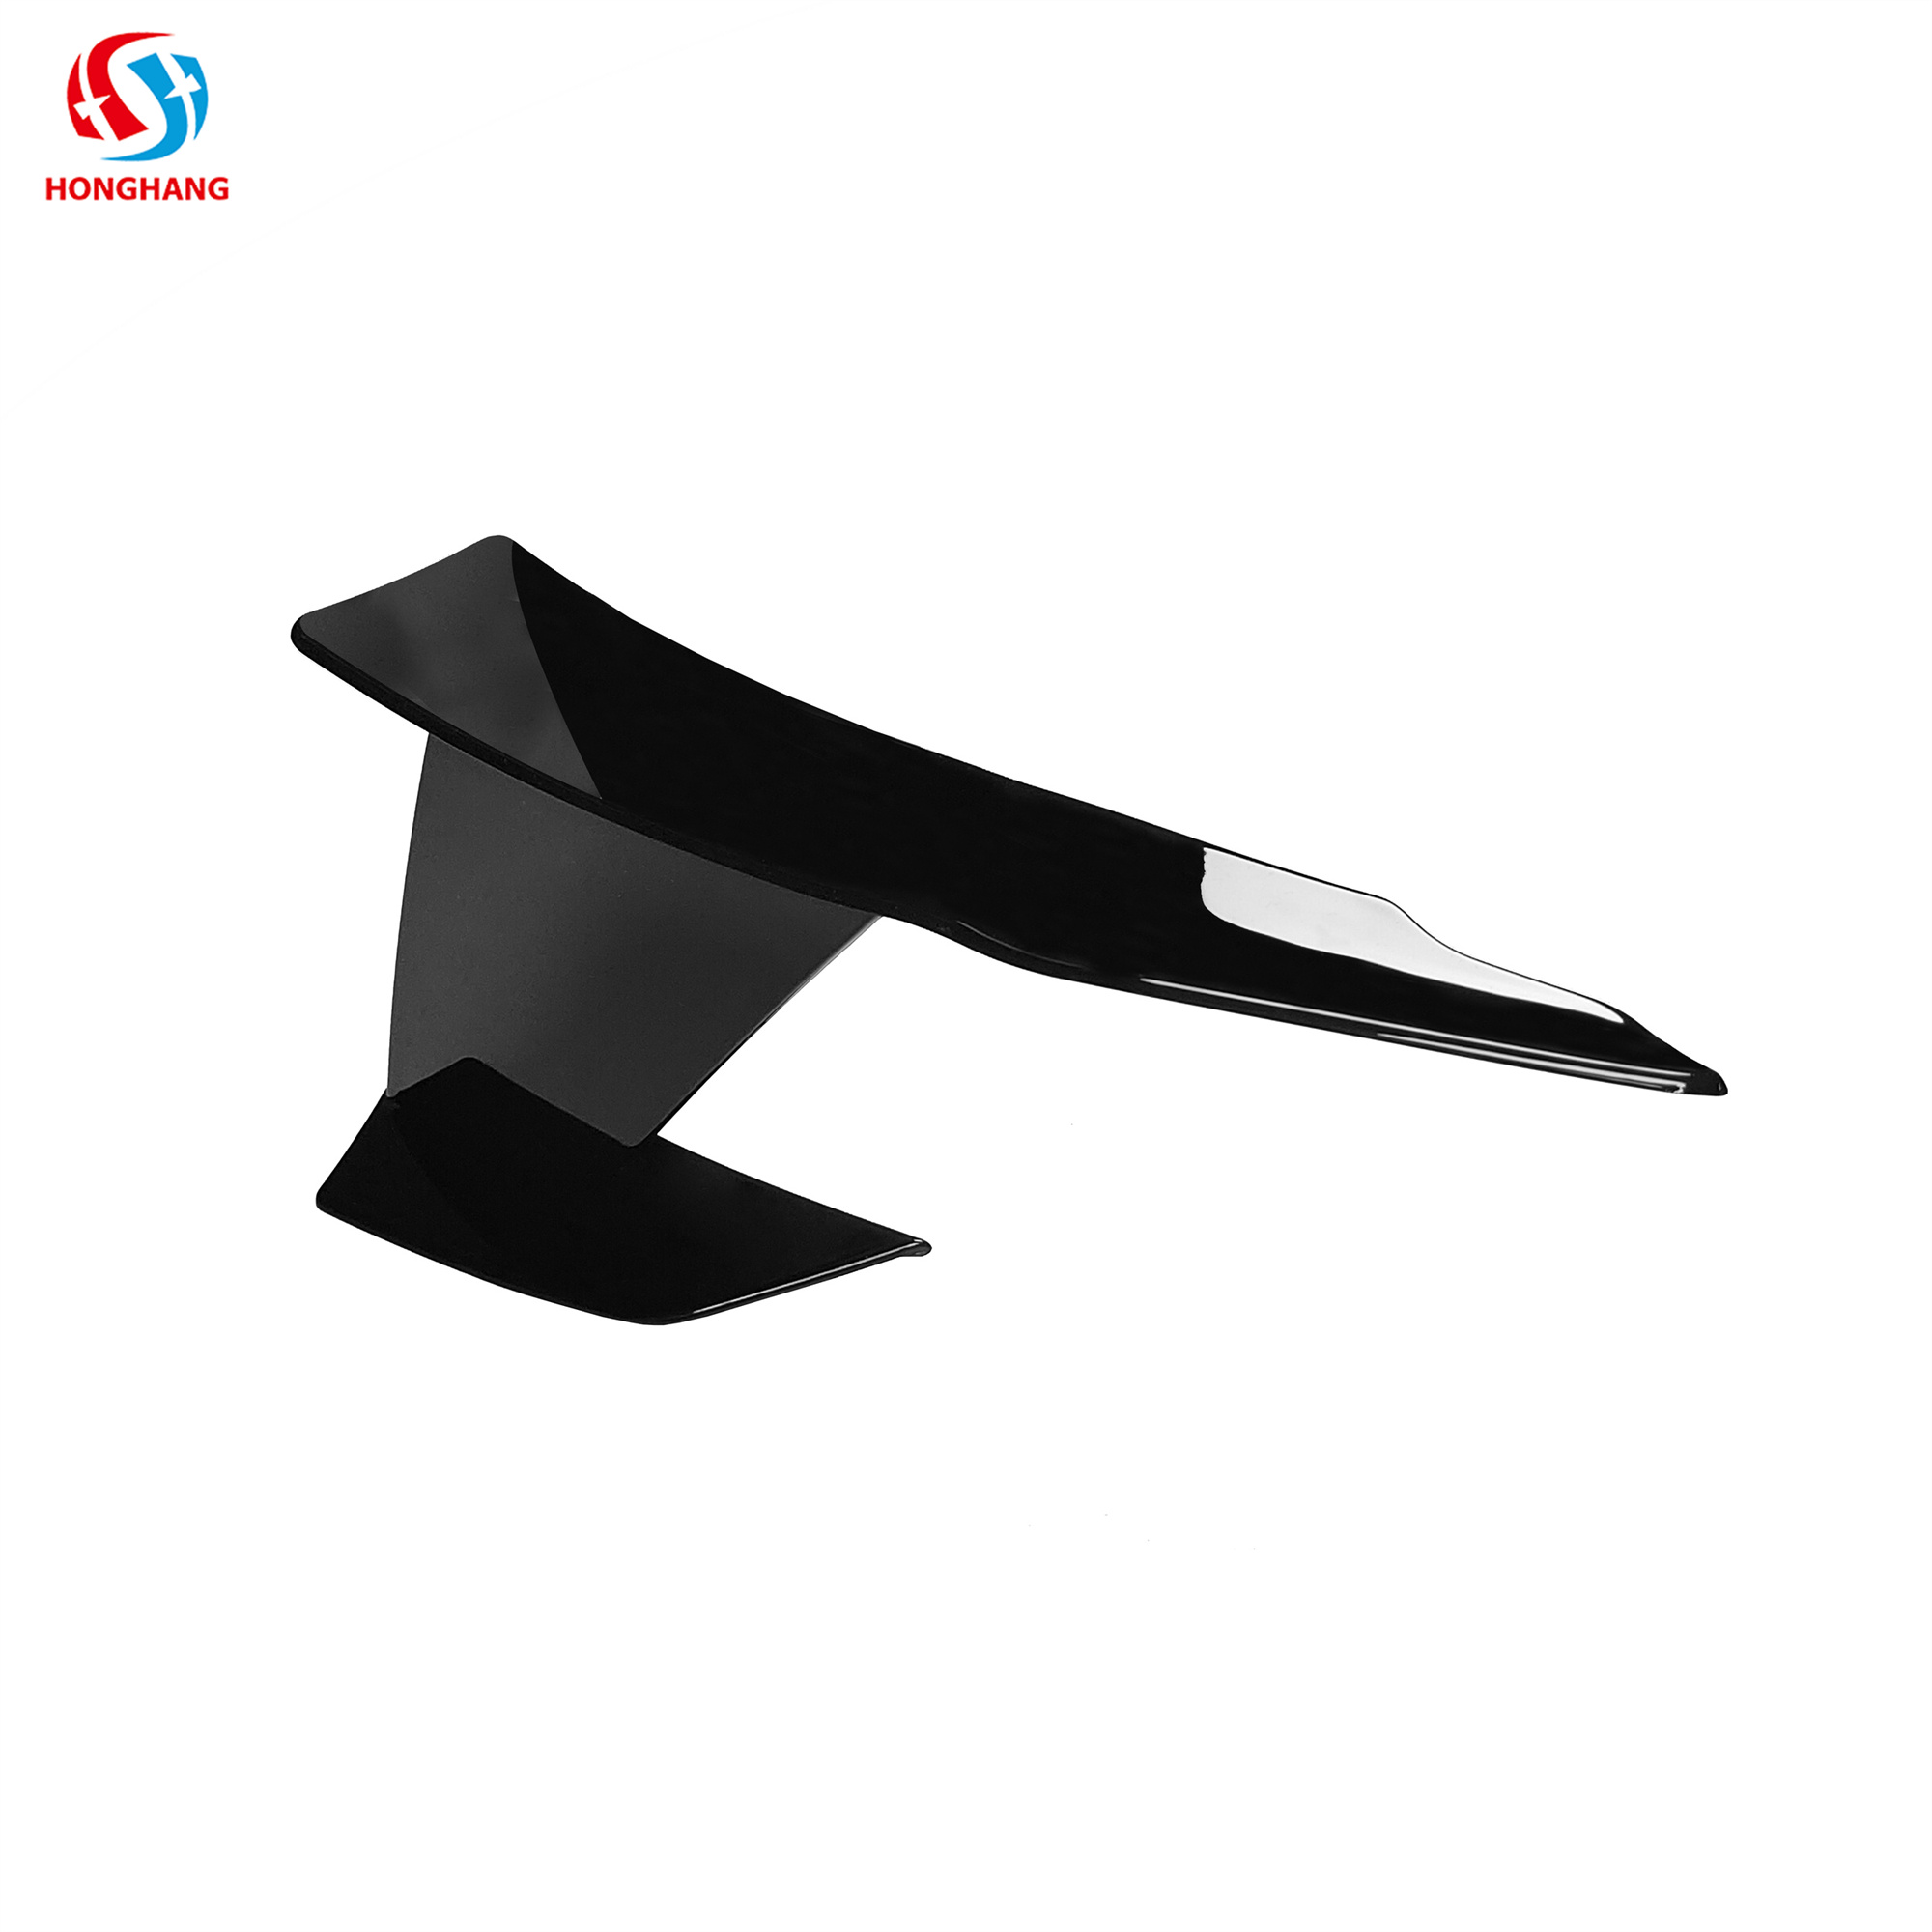 Type C Universal Side Sticker Front Spoiler For All Cars